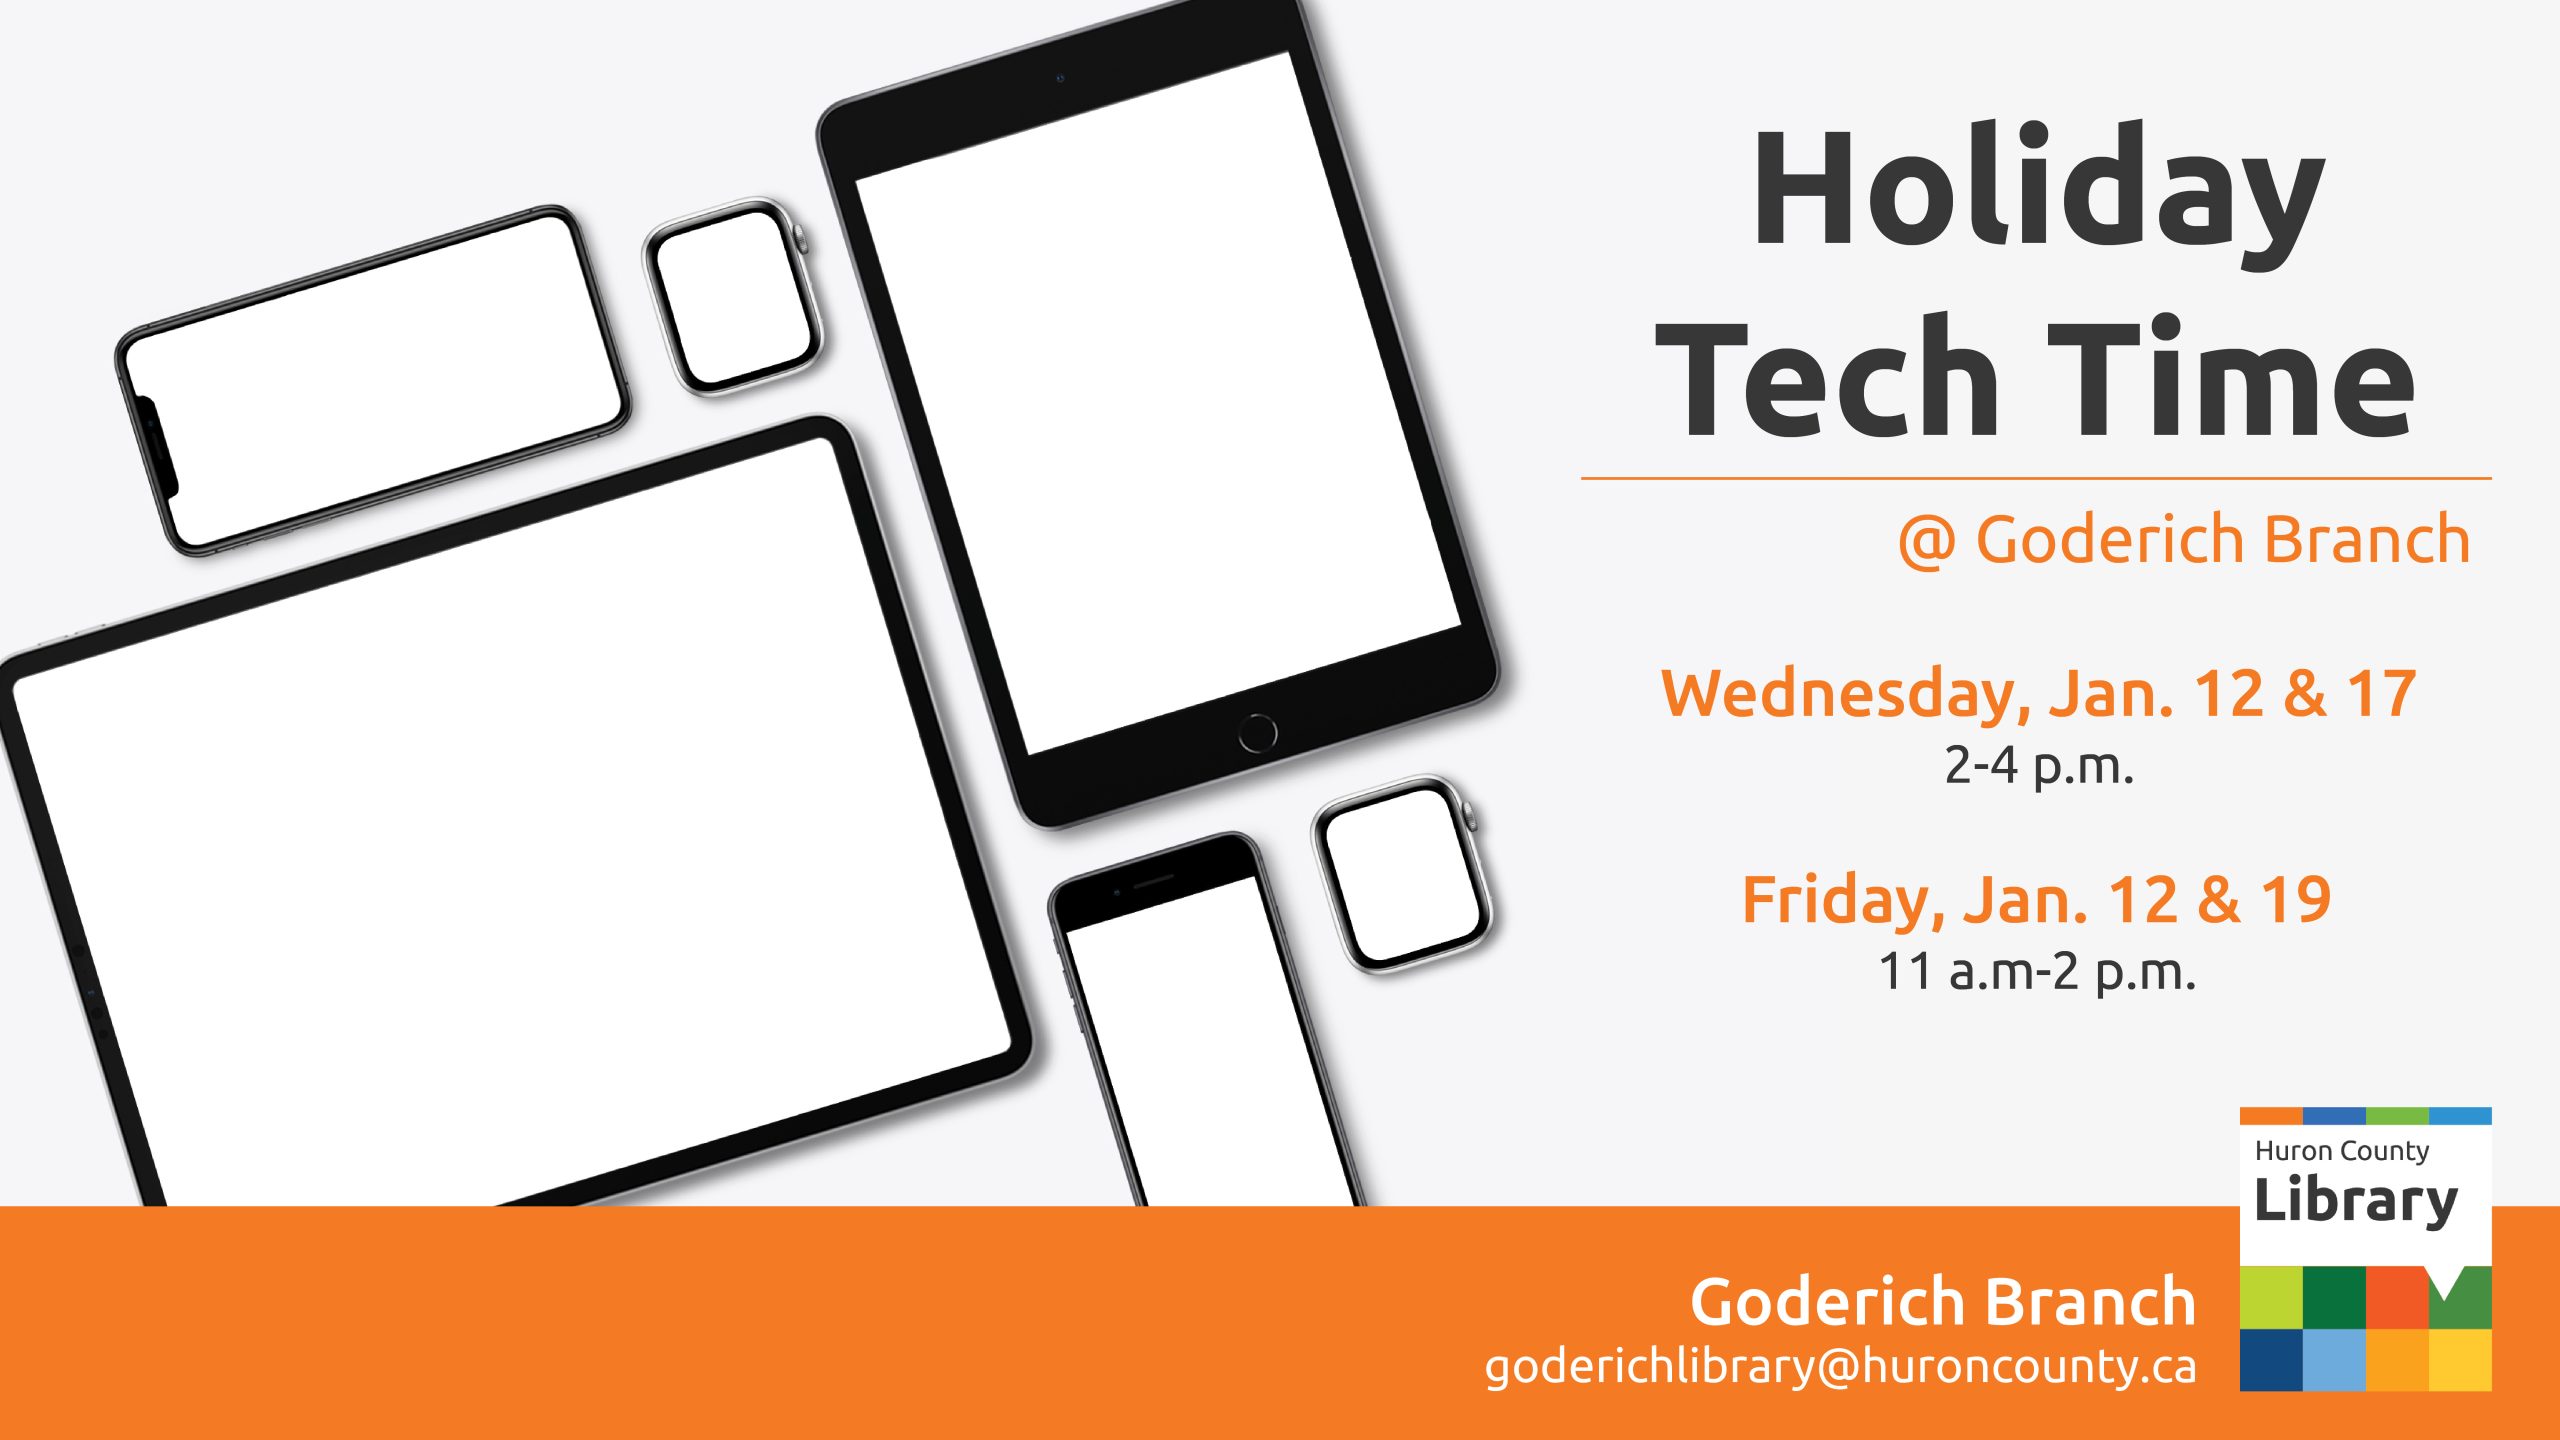 Photo of tablets and cell phones with text promoting holiday tech time at Goderich Branch